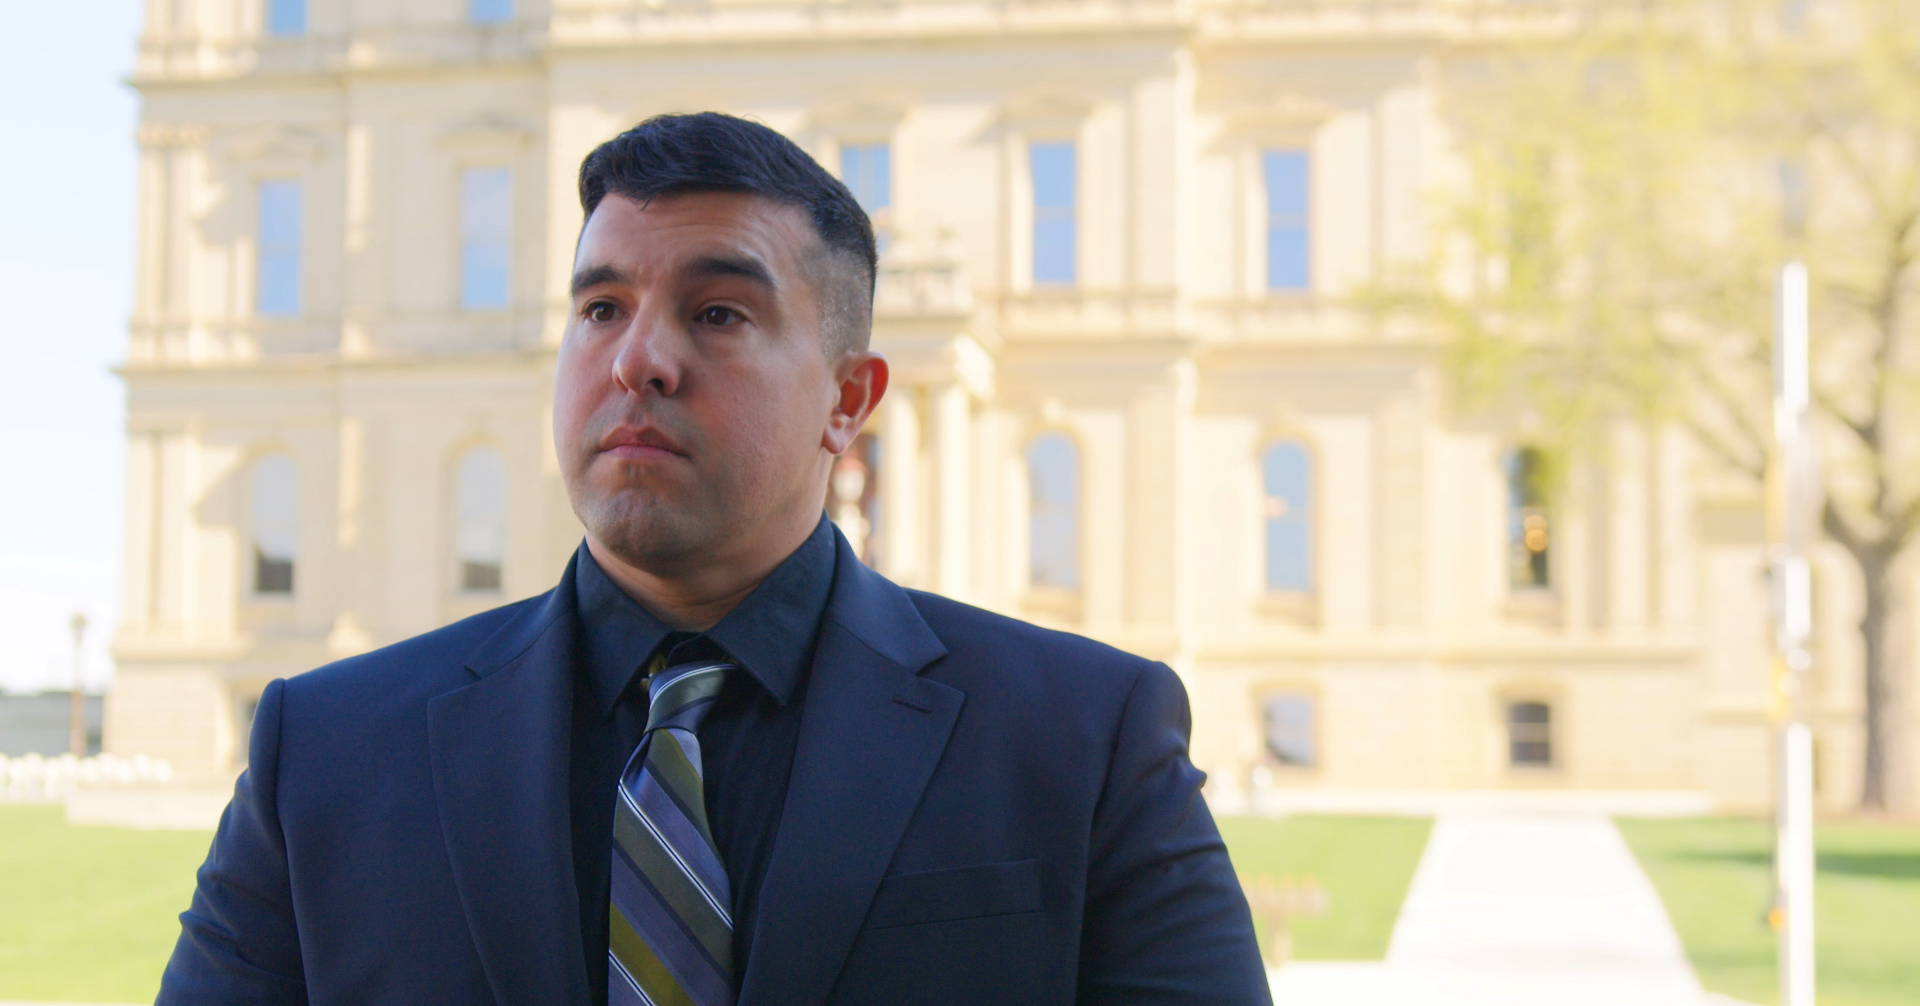 Richard Cardenas standing in front of the Michigan State Capitol